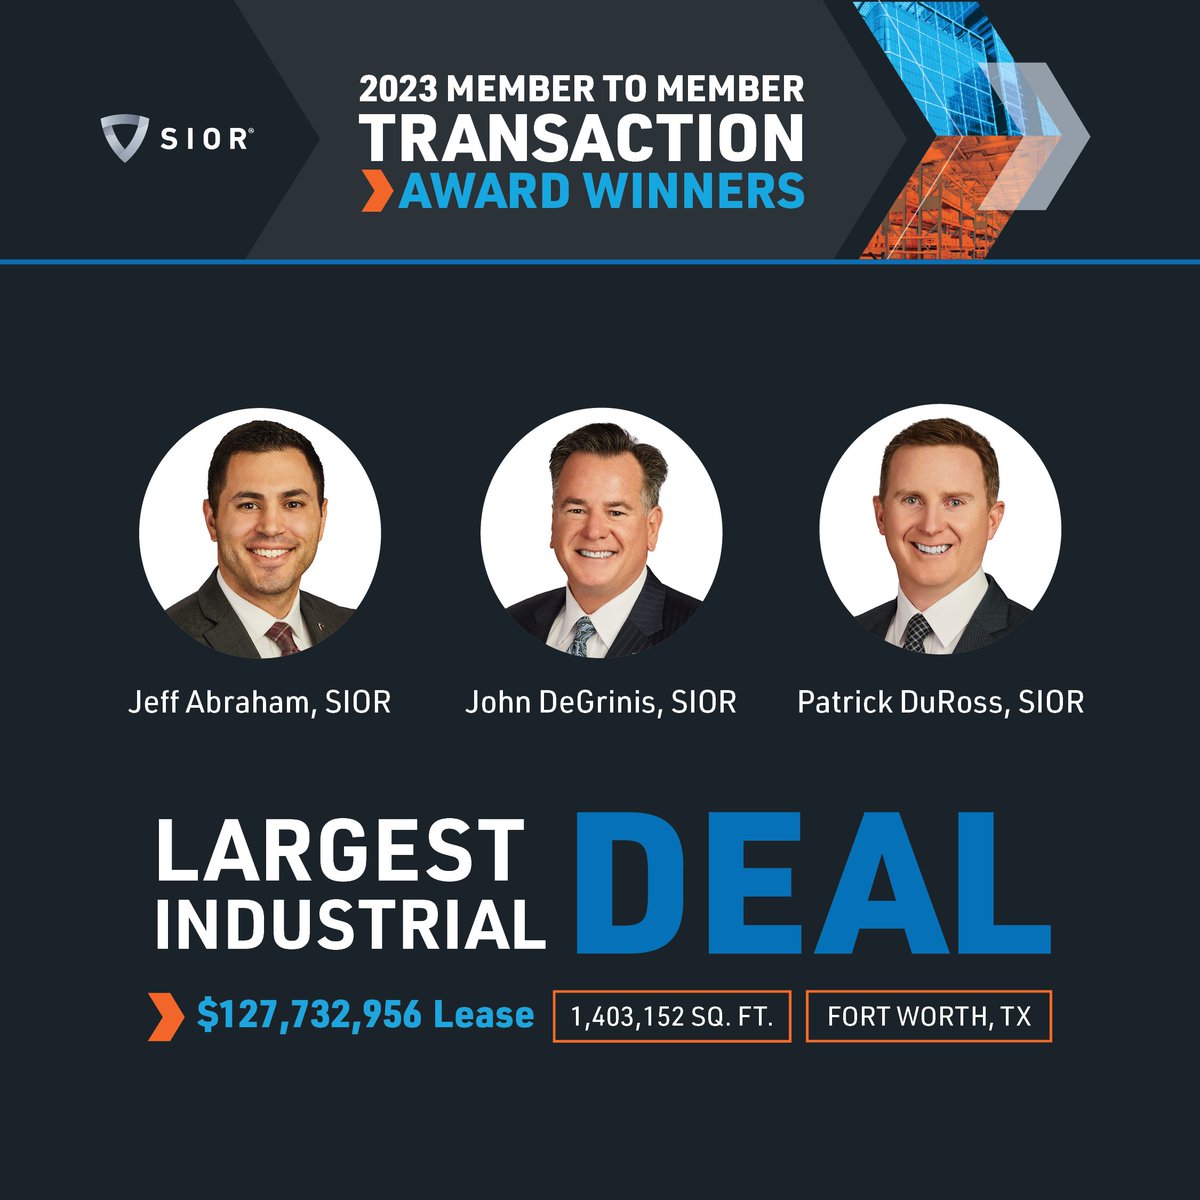 We announced the 2023 Transaction Award Winners at #SIORSpring24 - & we're beyond thrilled to congratulate them again! For the largest industrial deal: congrats to Jeff Abraham, SIOR; John DeGrinis, SIOR; & Patrick DuRoss, SIOR, for a $127.7M lease in TX! hubs.ly/Q02wR2cy0